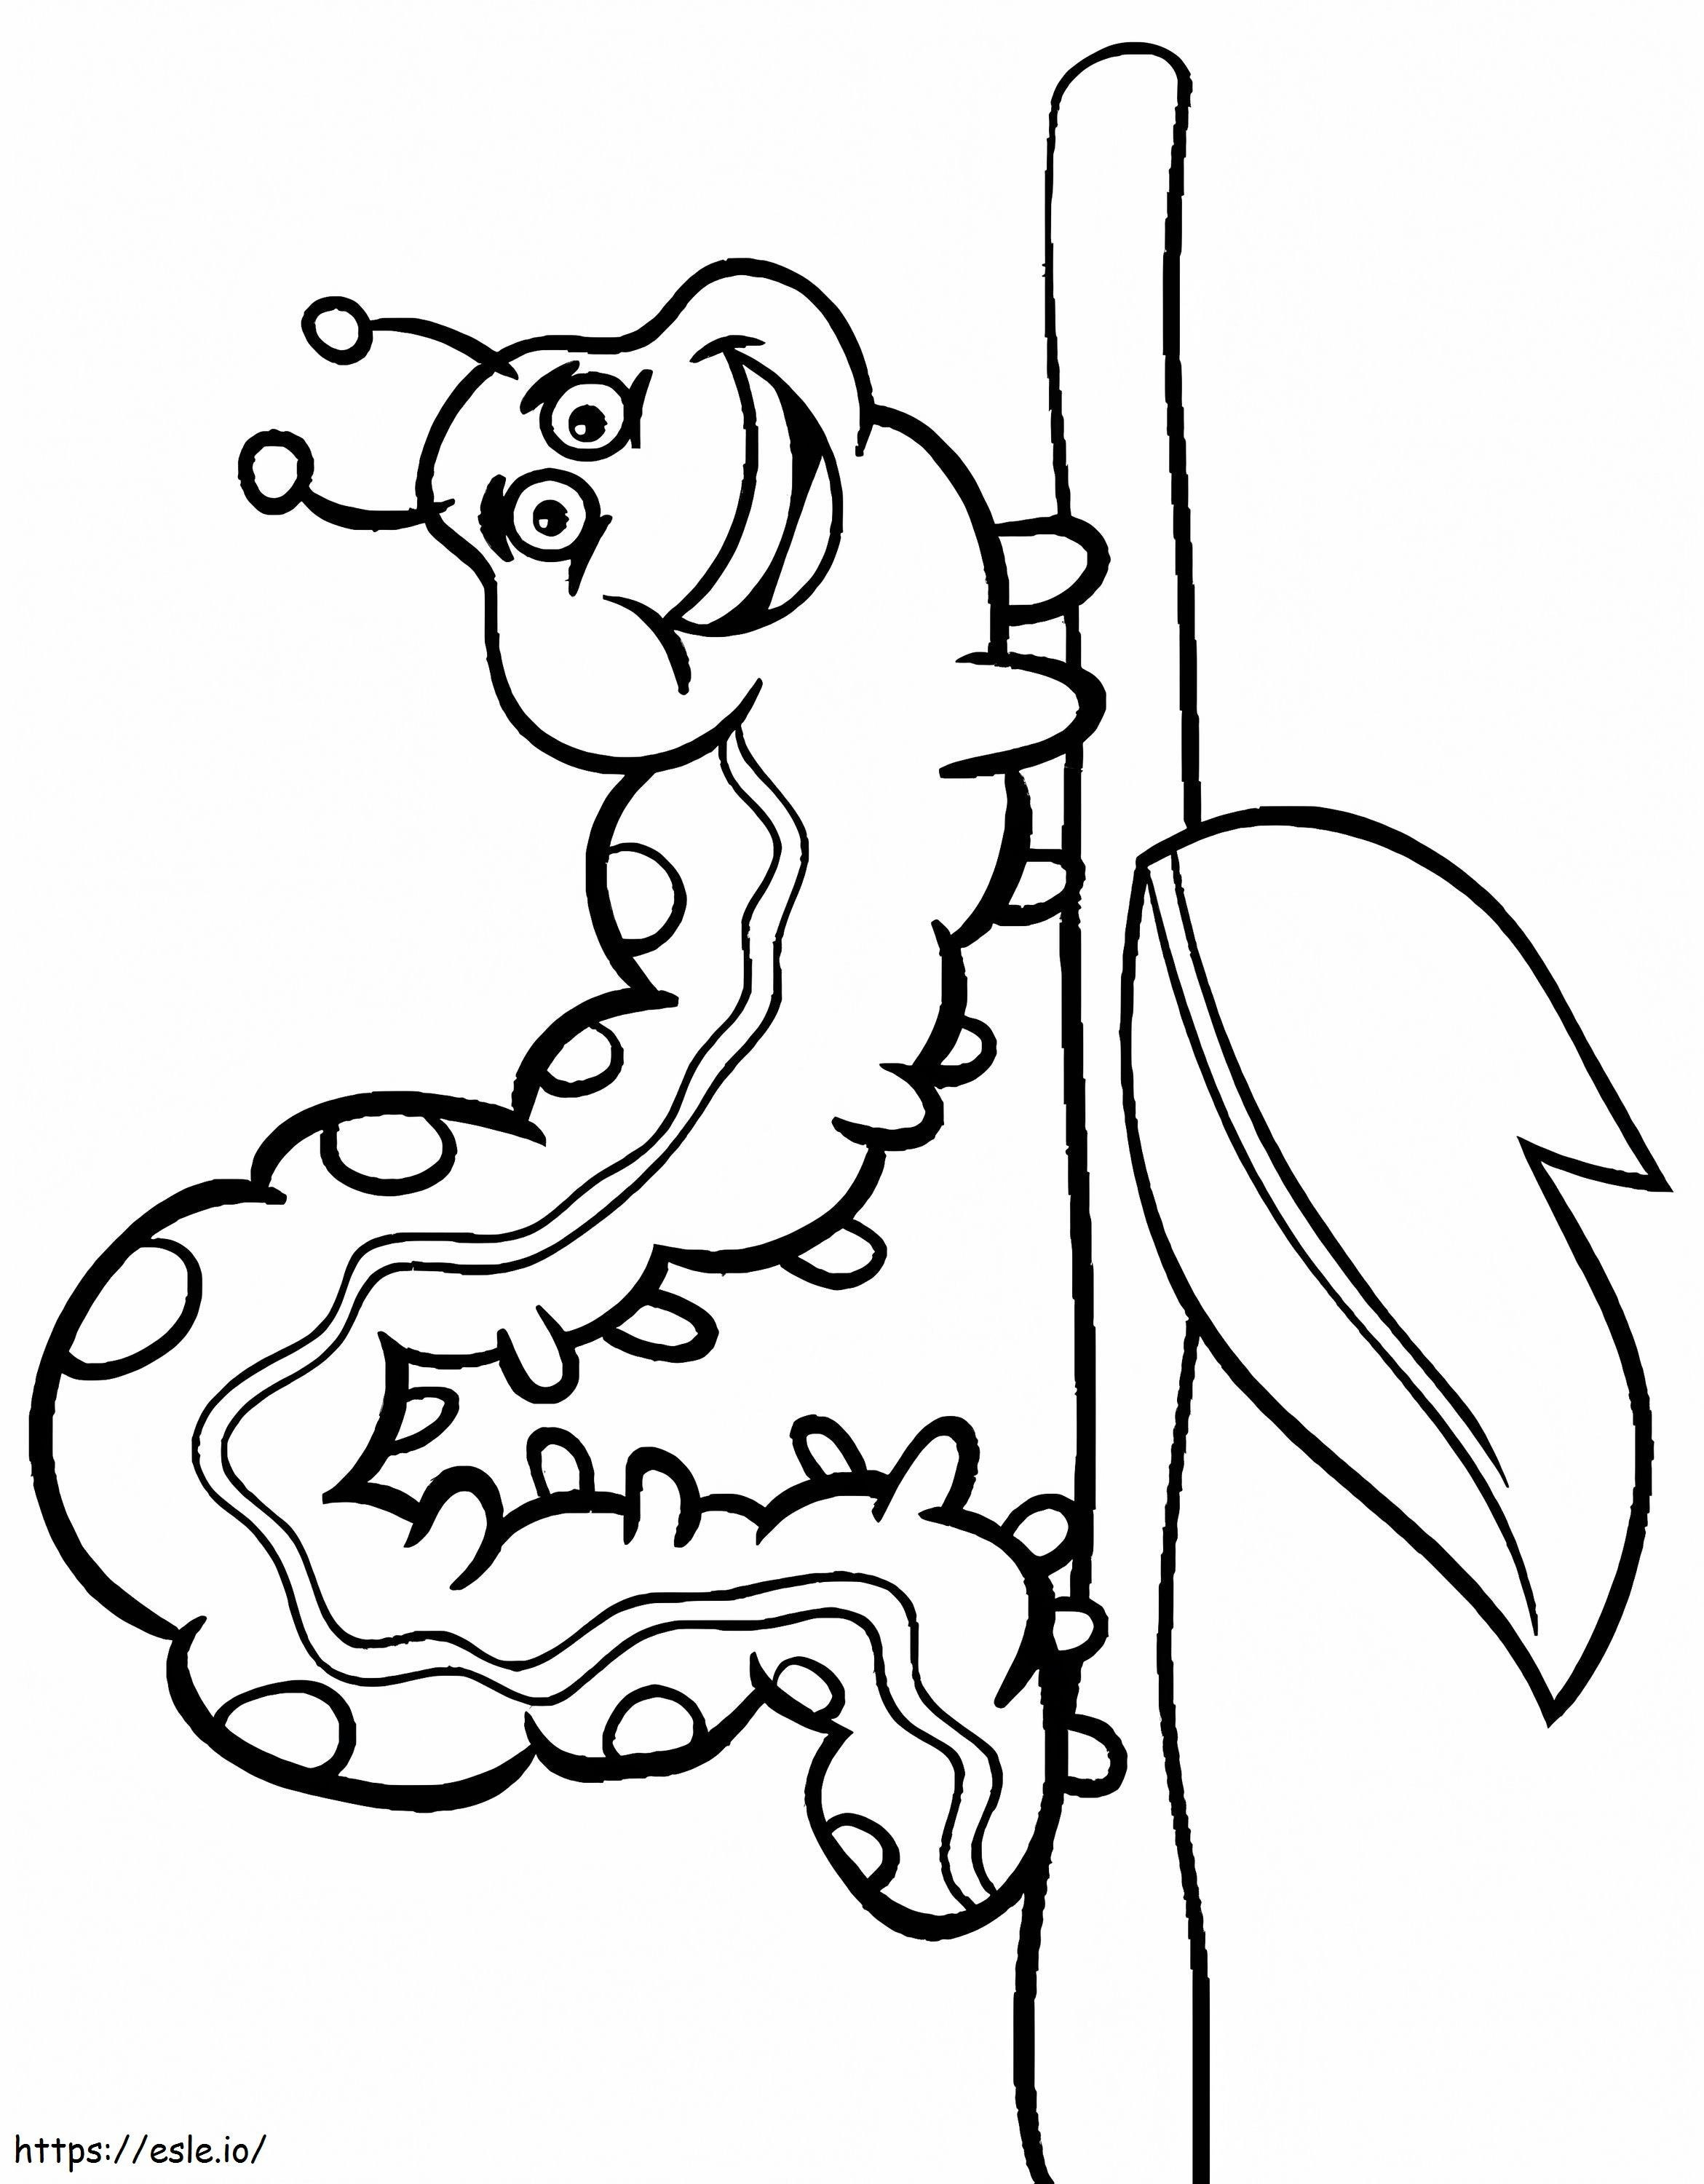 Laughing Worm coloring page